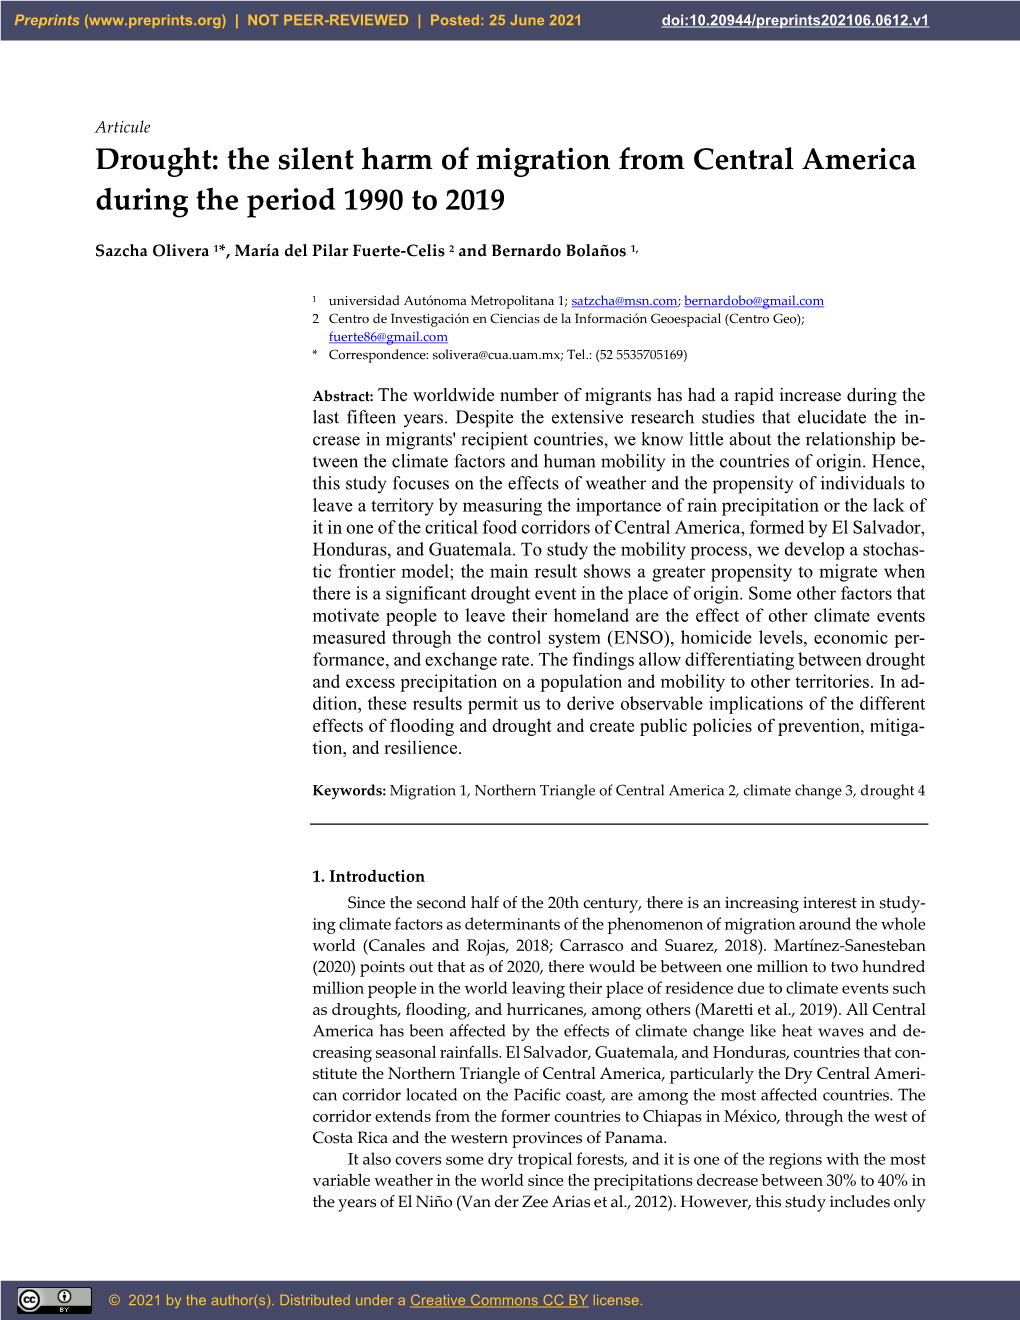 Drought: the Silent Harm of Migration from Central America During the Period 1990 to 2019